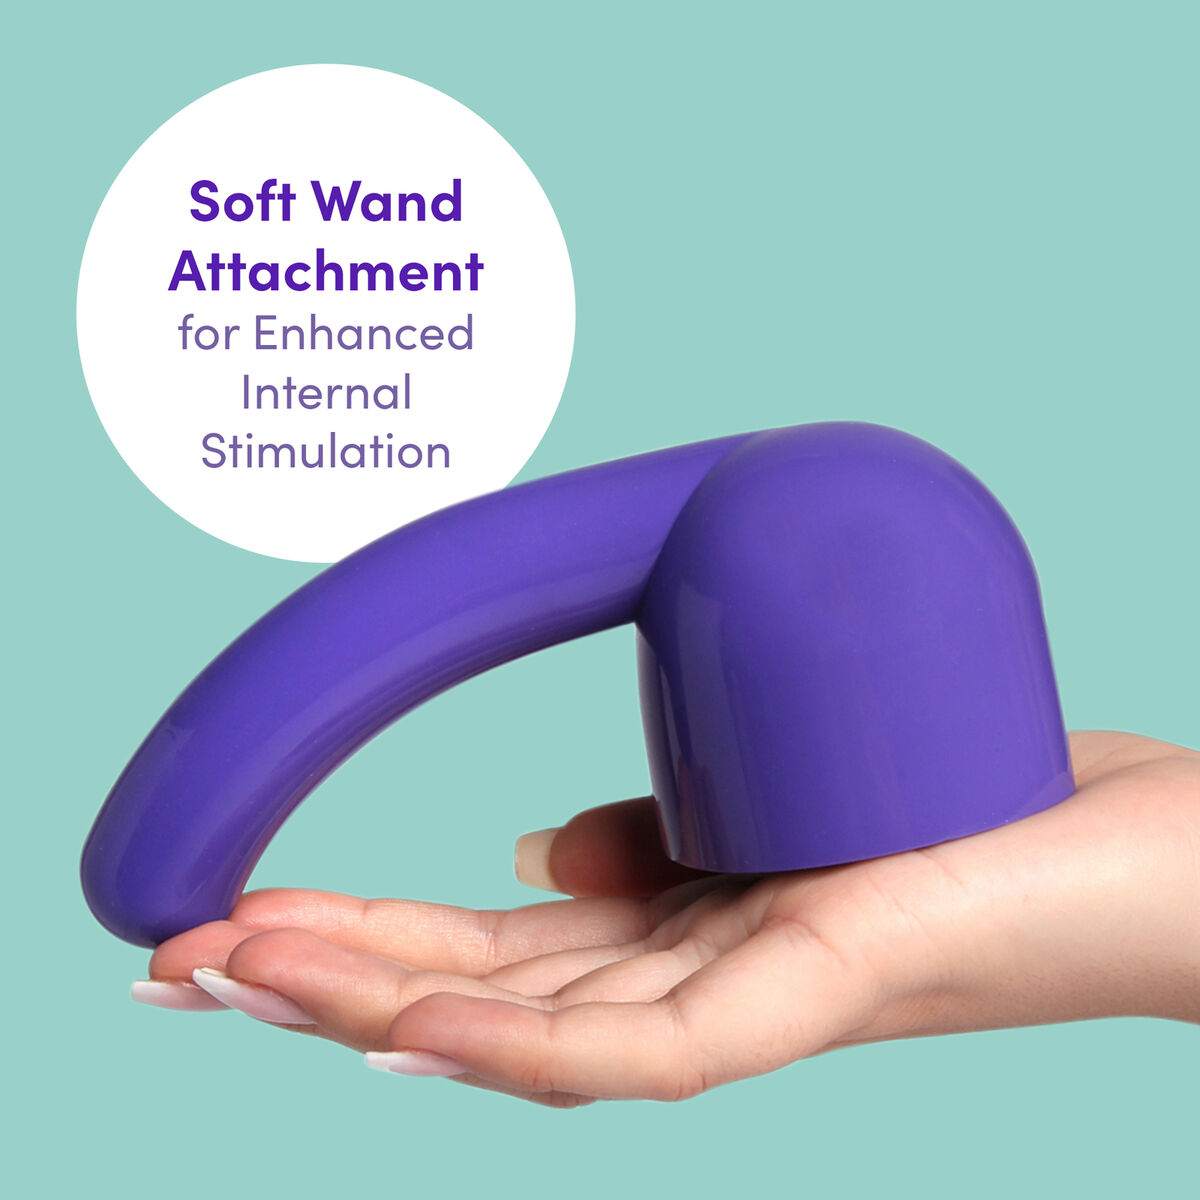 andria mullins recommends magic wand attachment heads pic